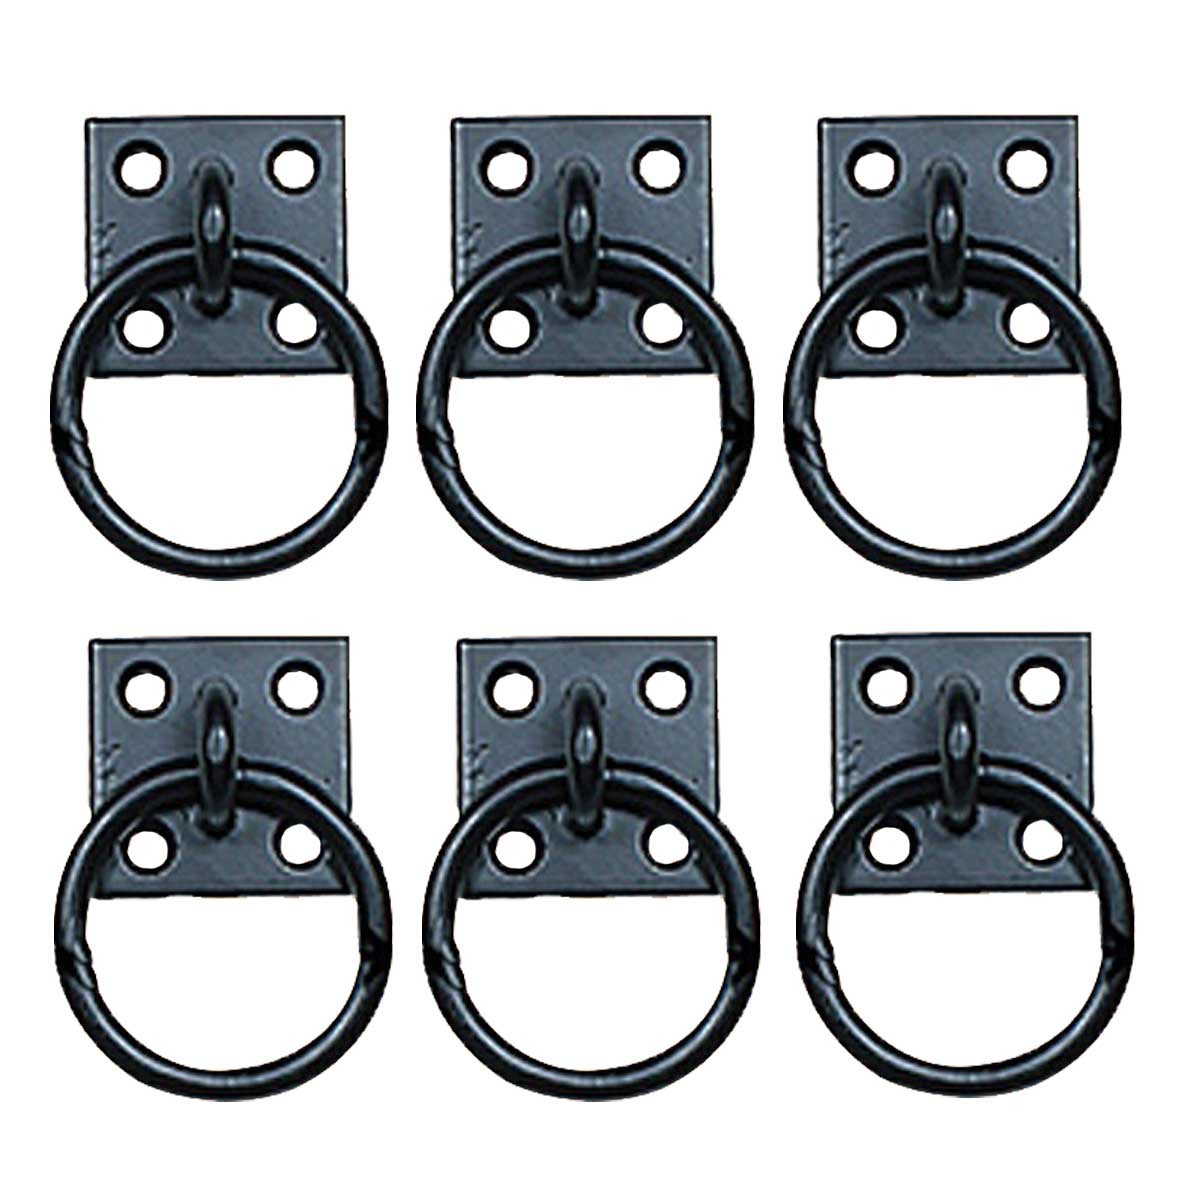 Wrought Iron Cabinet Hardware Ring Pulls 2 Inch Set Of 6